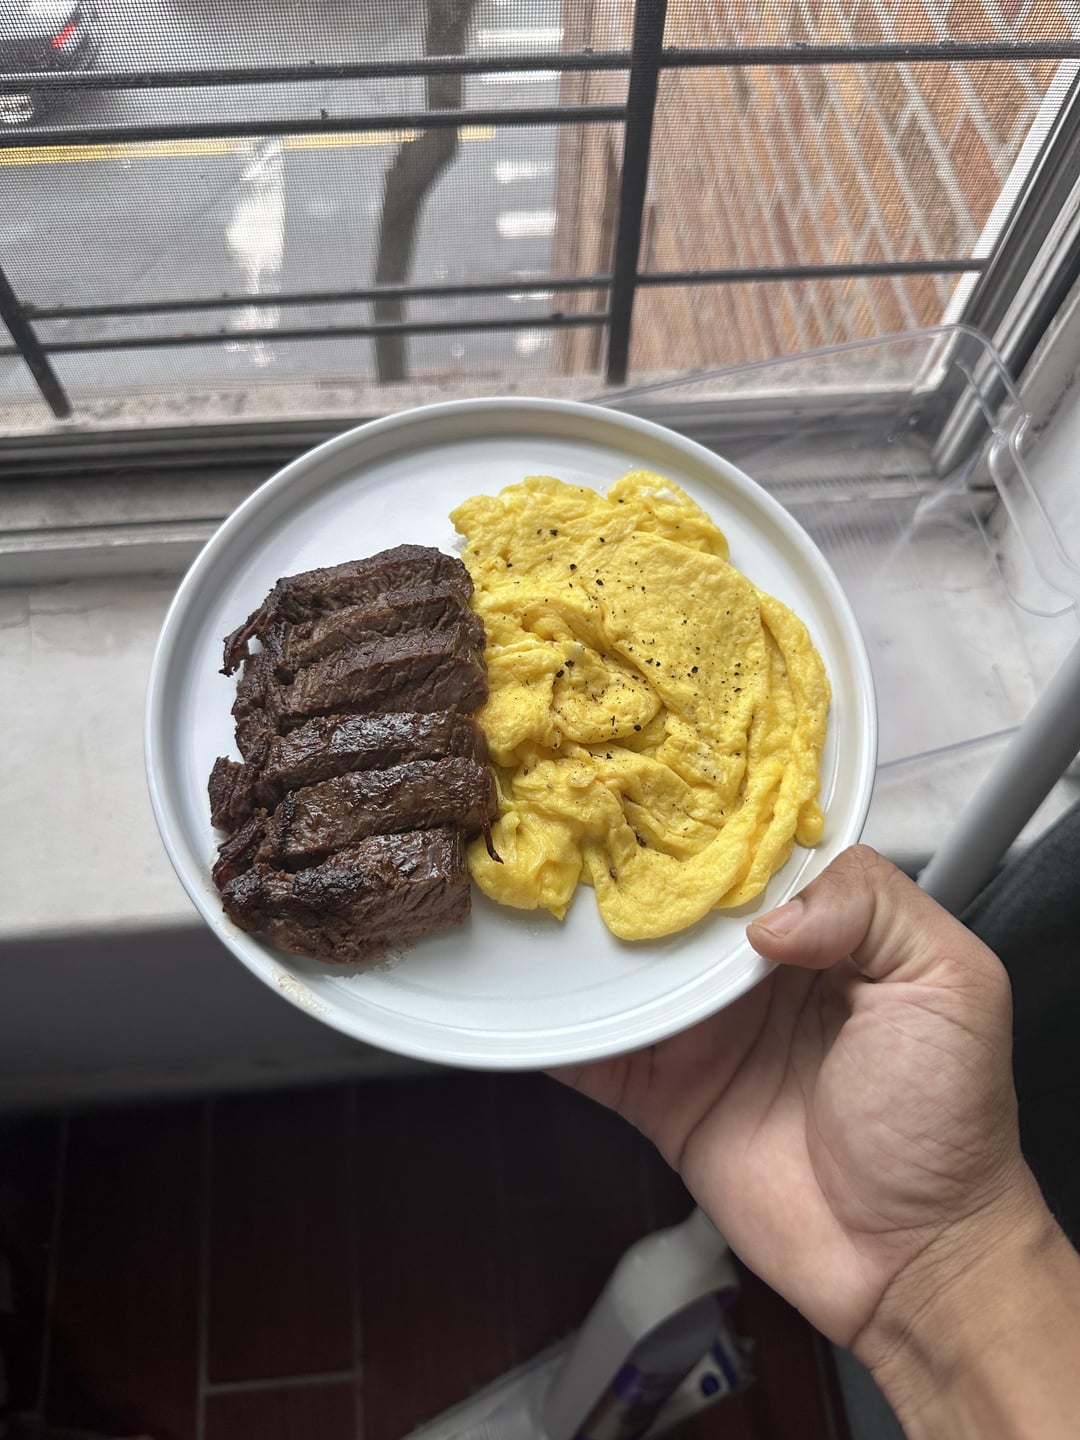 a little over cooked but my steak and eggs - Dining and Cooking